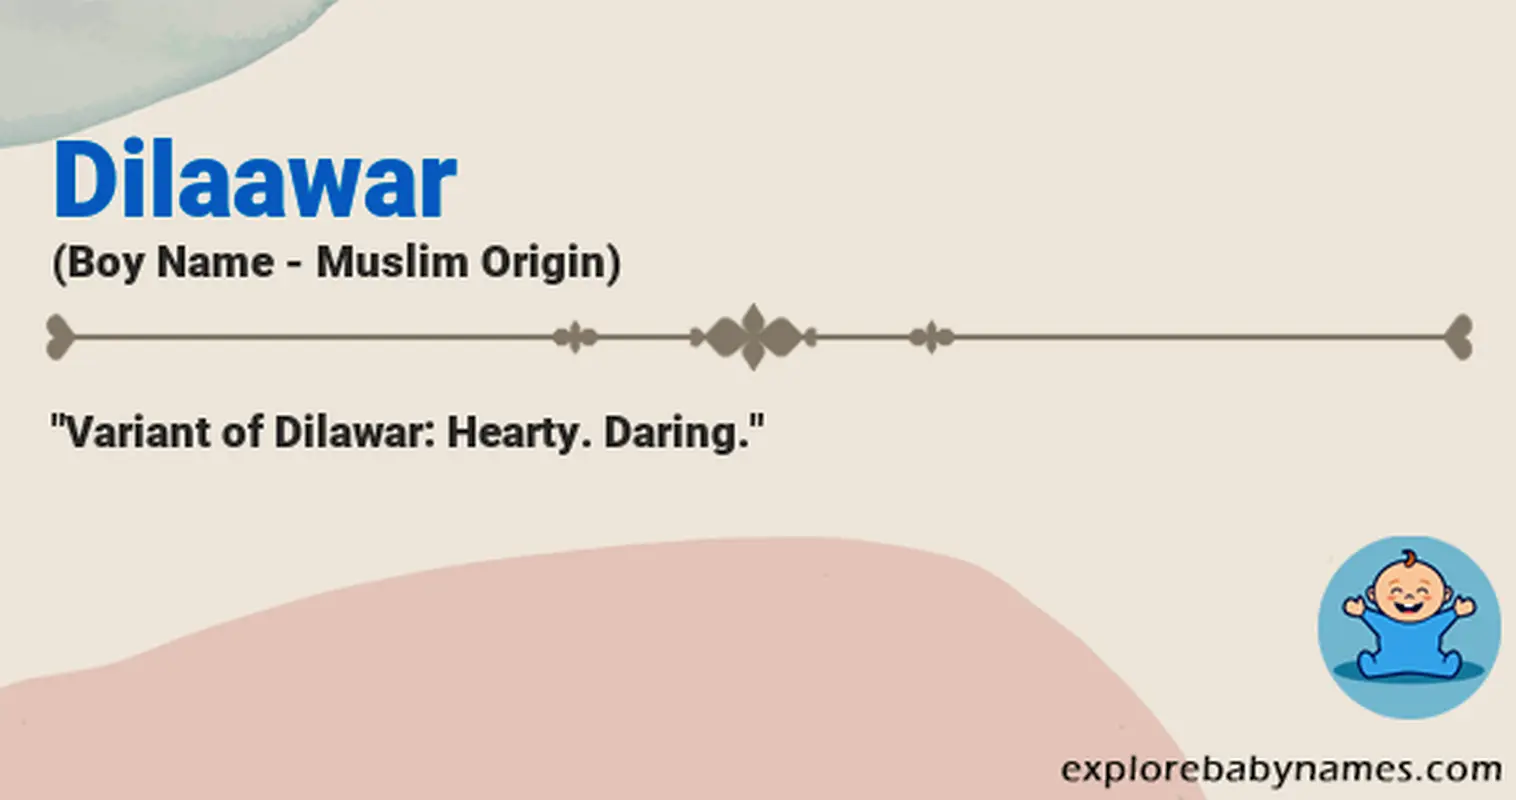 Meaning of Dilaawar